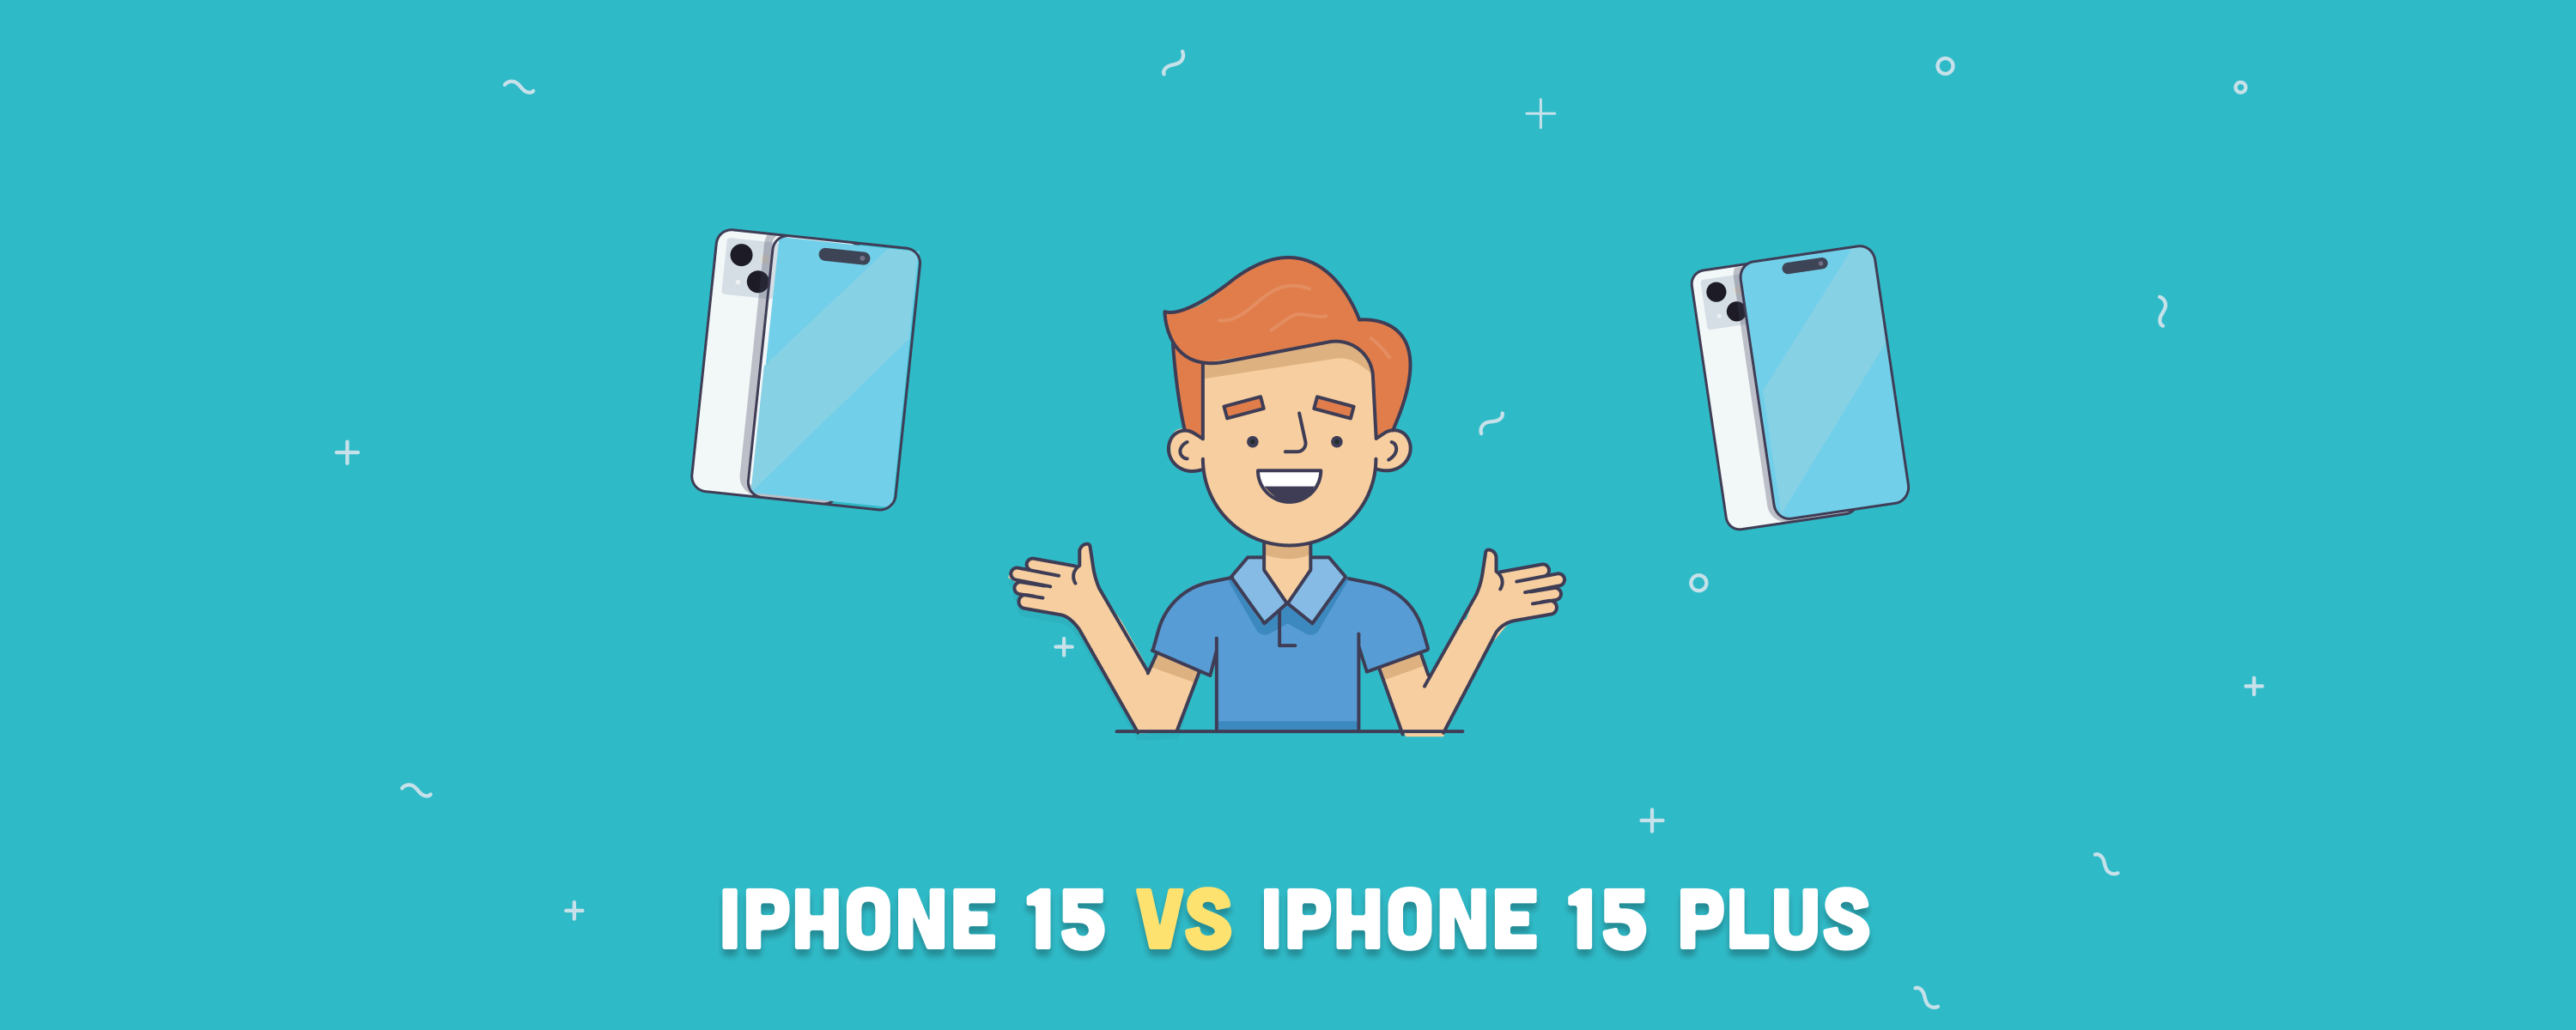 iPhone 15 vs. iPhone 15 Plus: What Are the Differences?